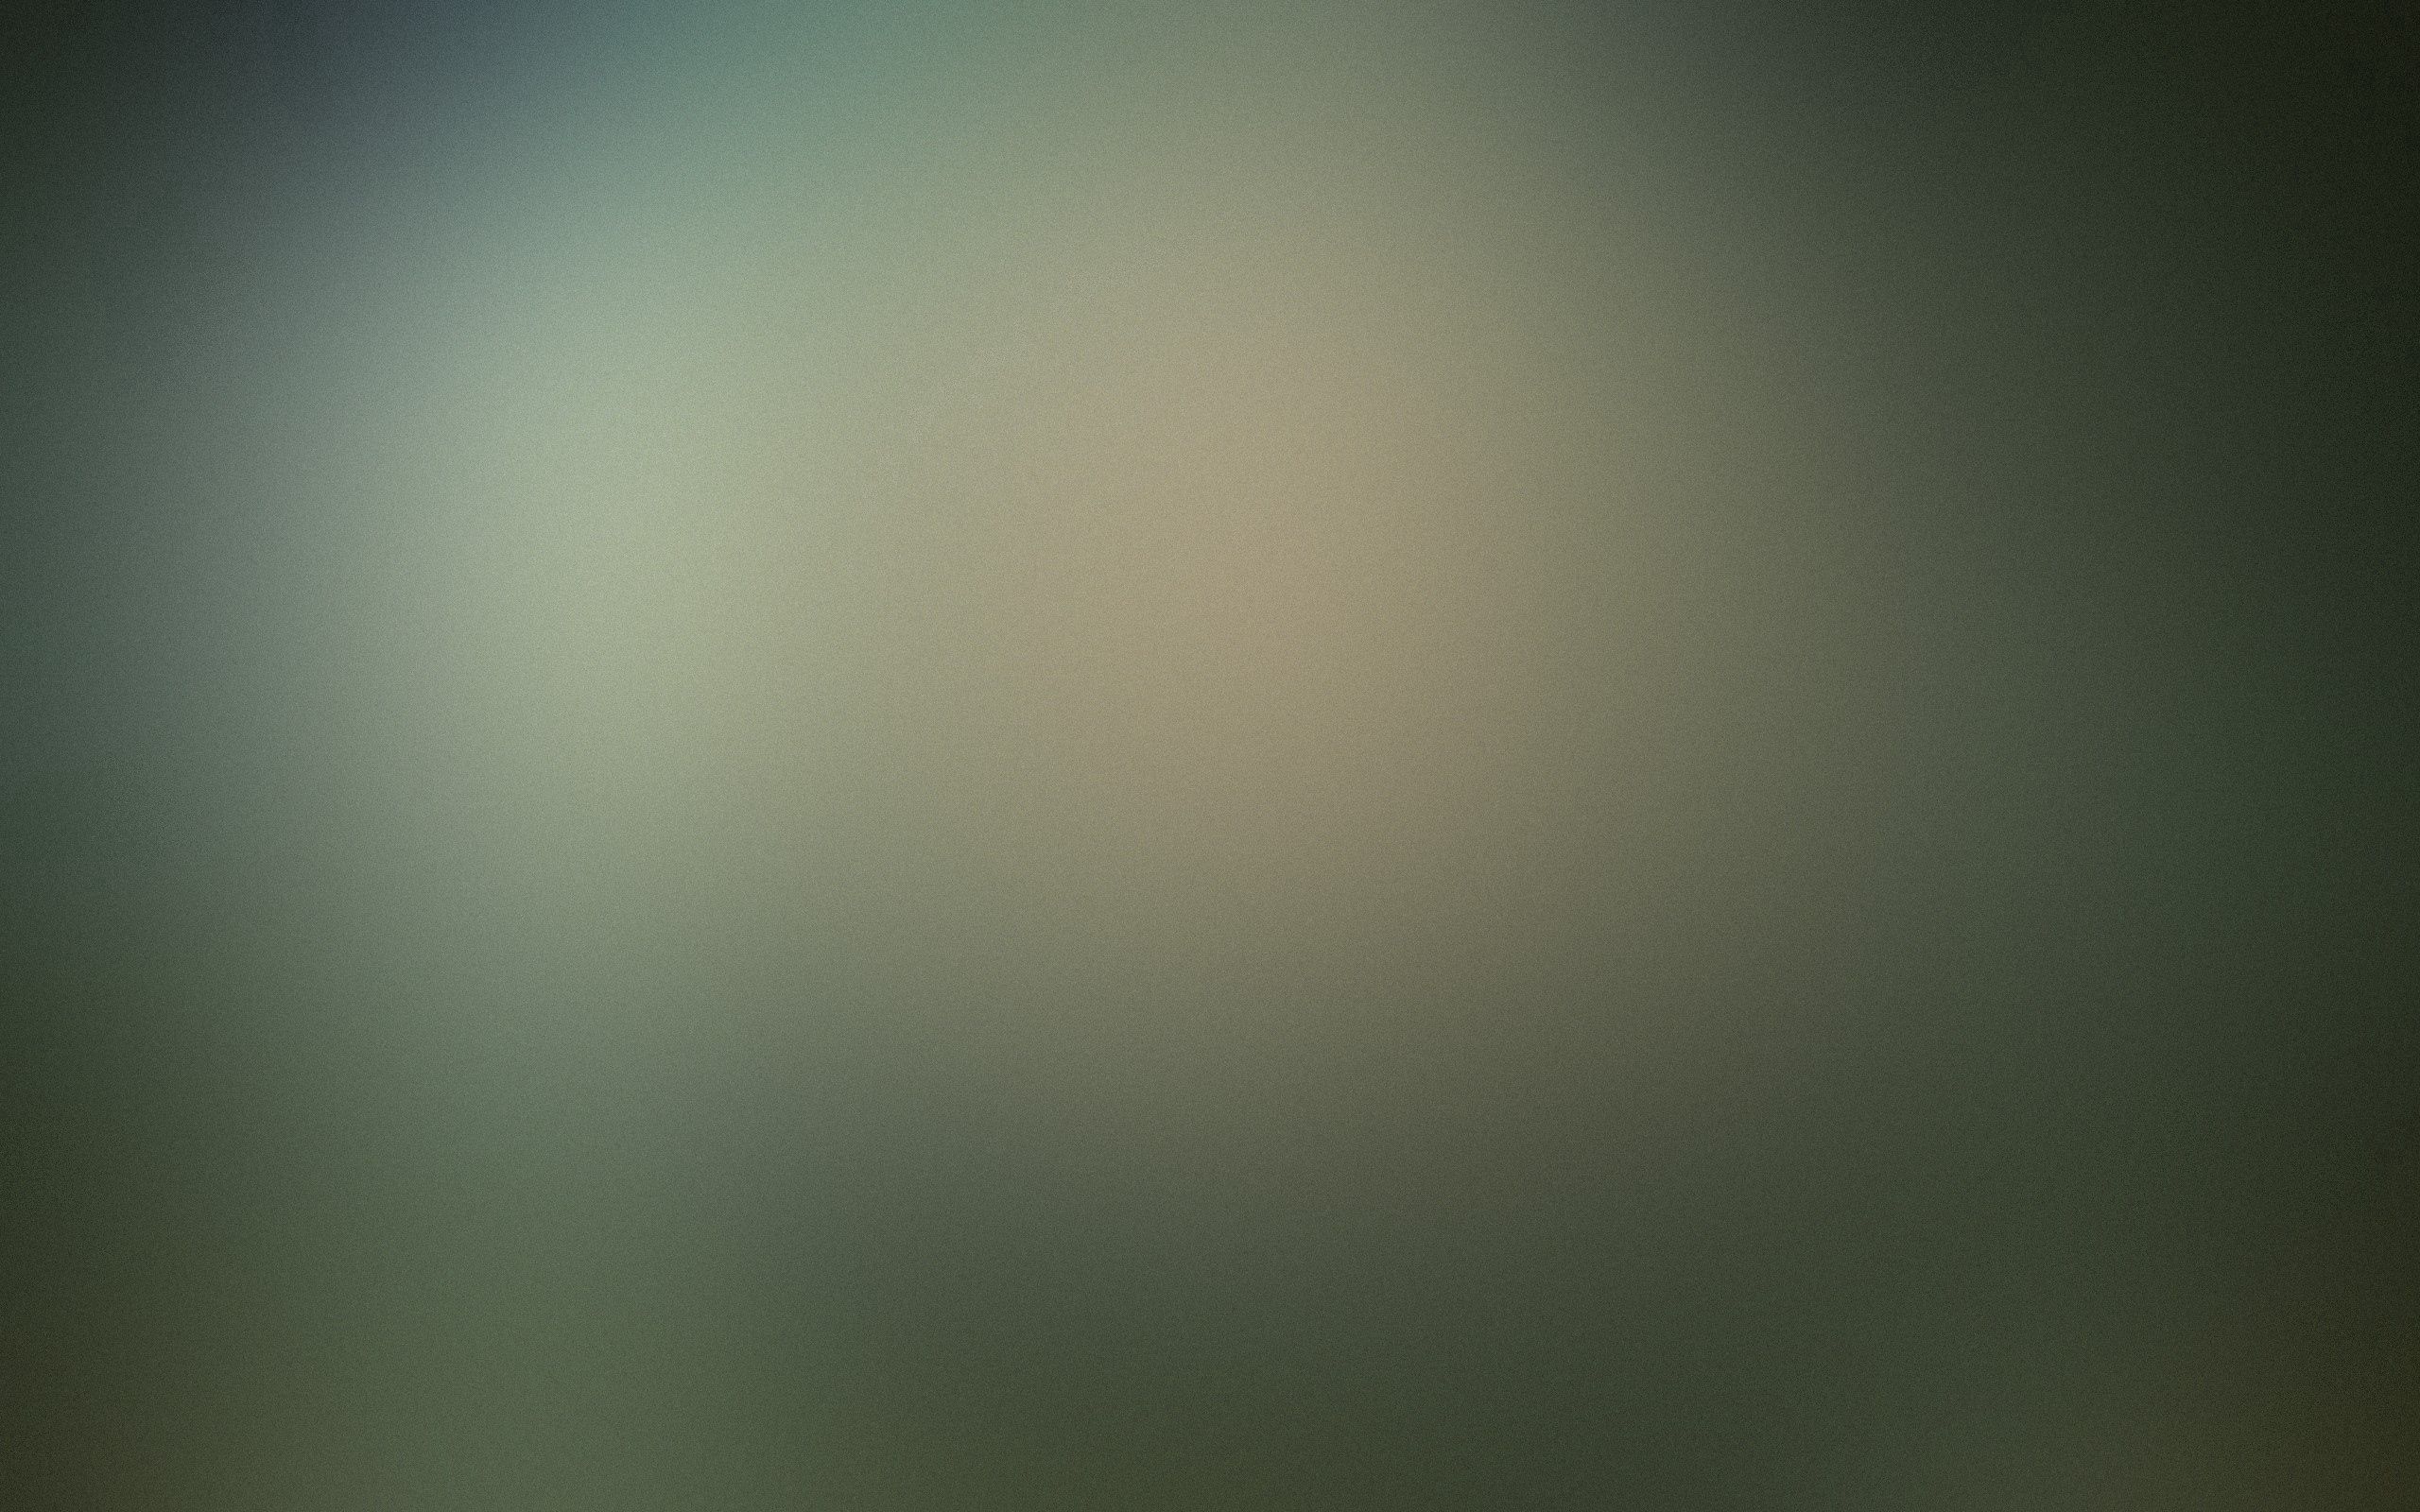 solid, shine, light, texture, textures, stains, spots, shades wallpaper for mobile